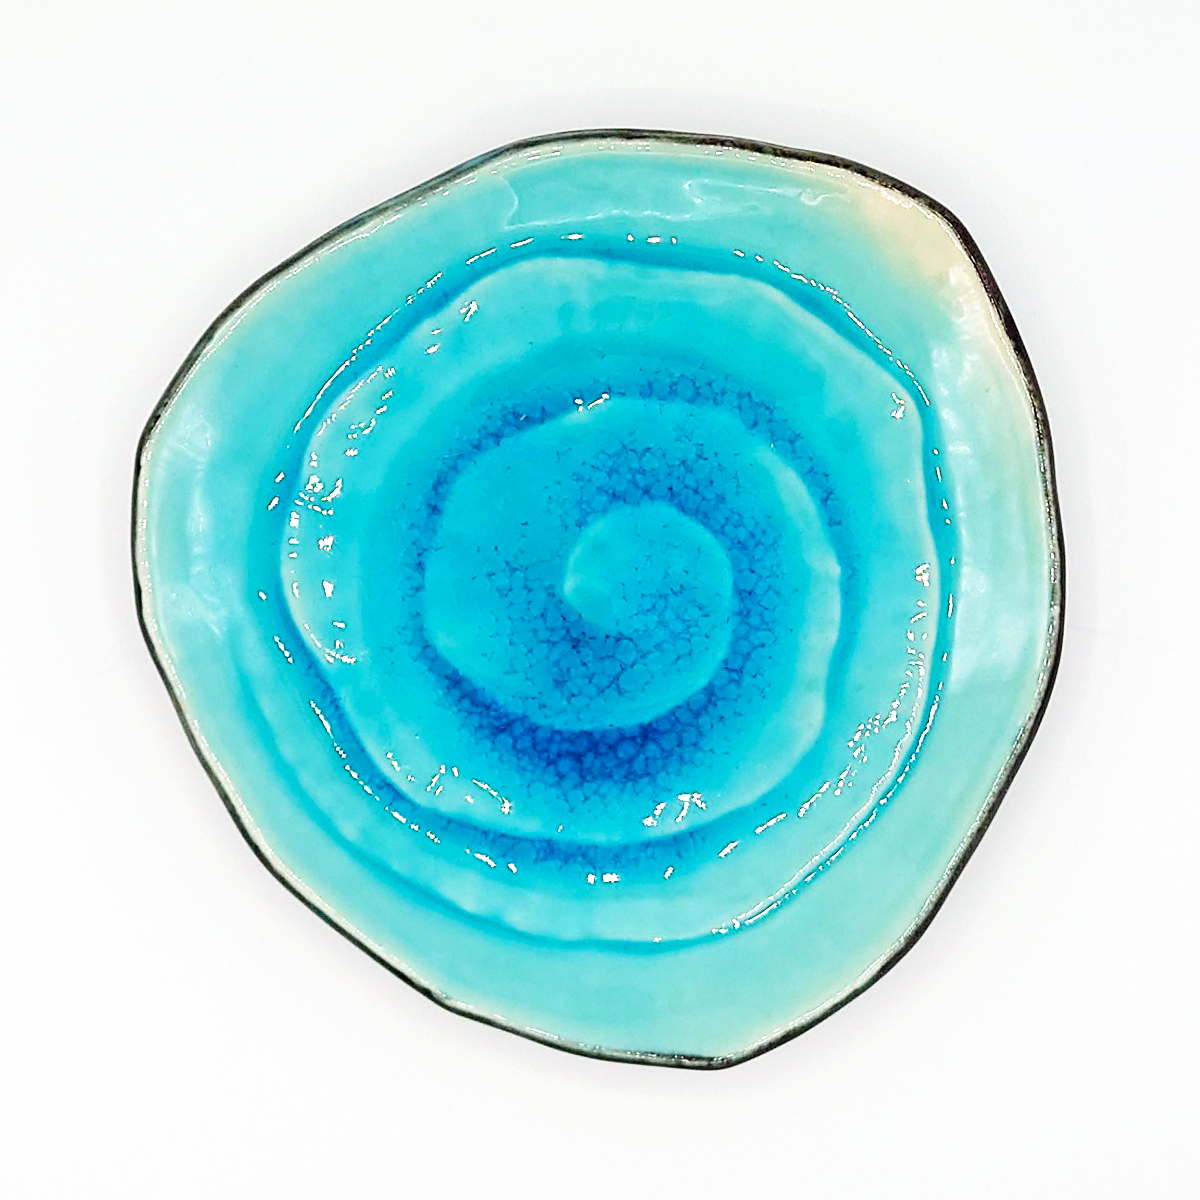 ojaep11_Assiette Triangulaire Ronde - Bleu Turquoise _ 8,50€ (2)